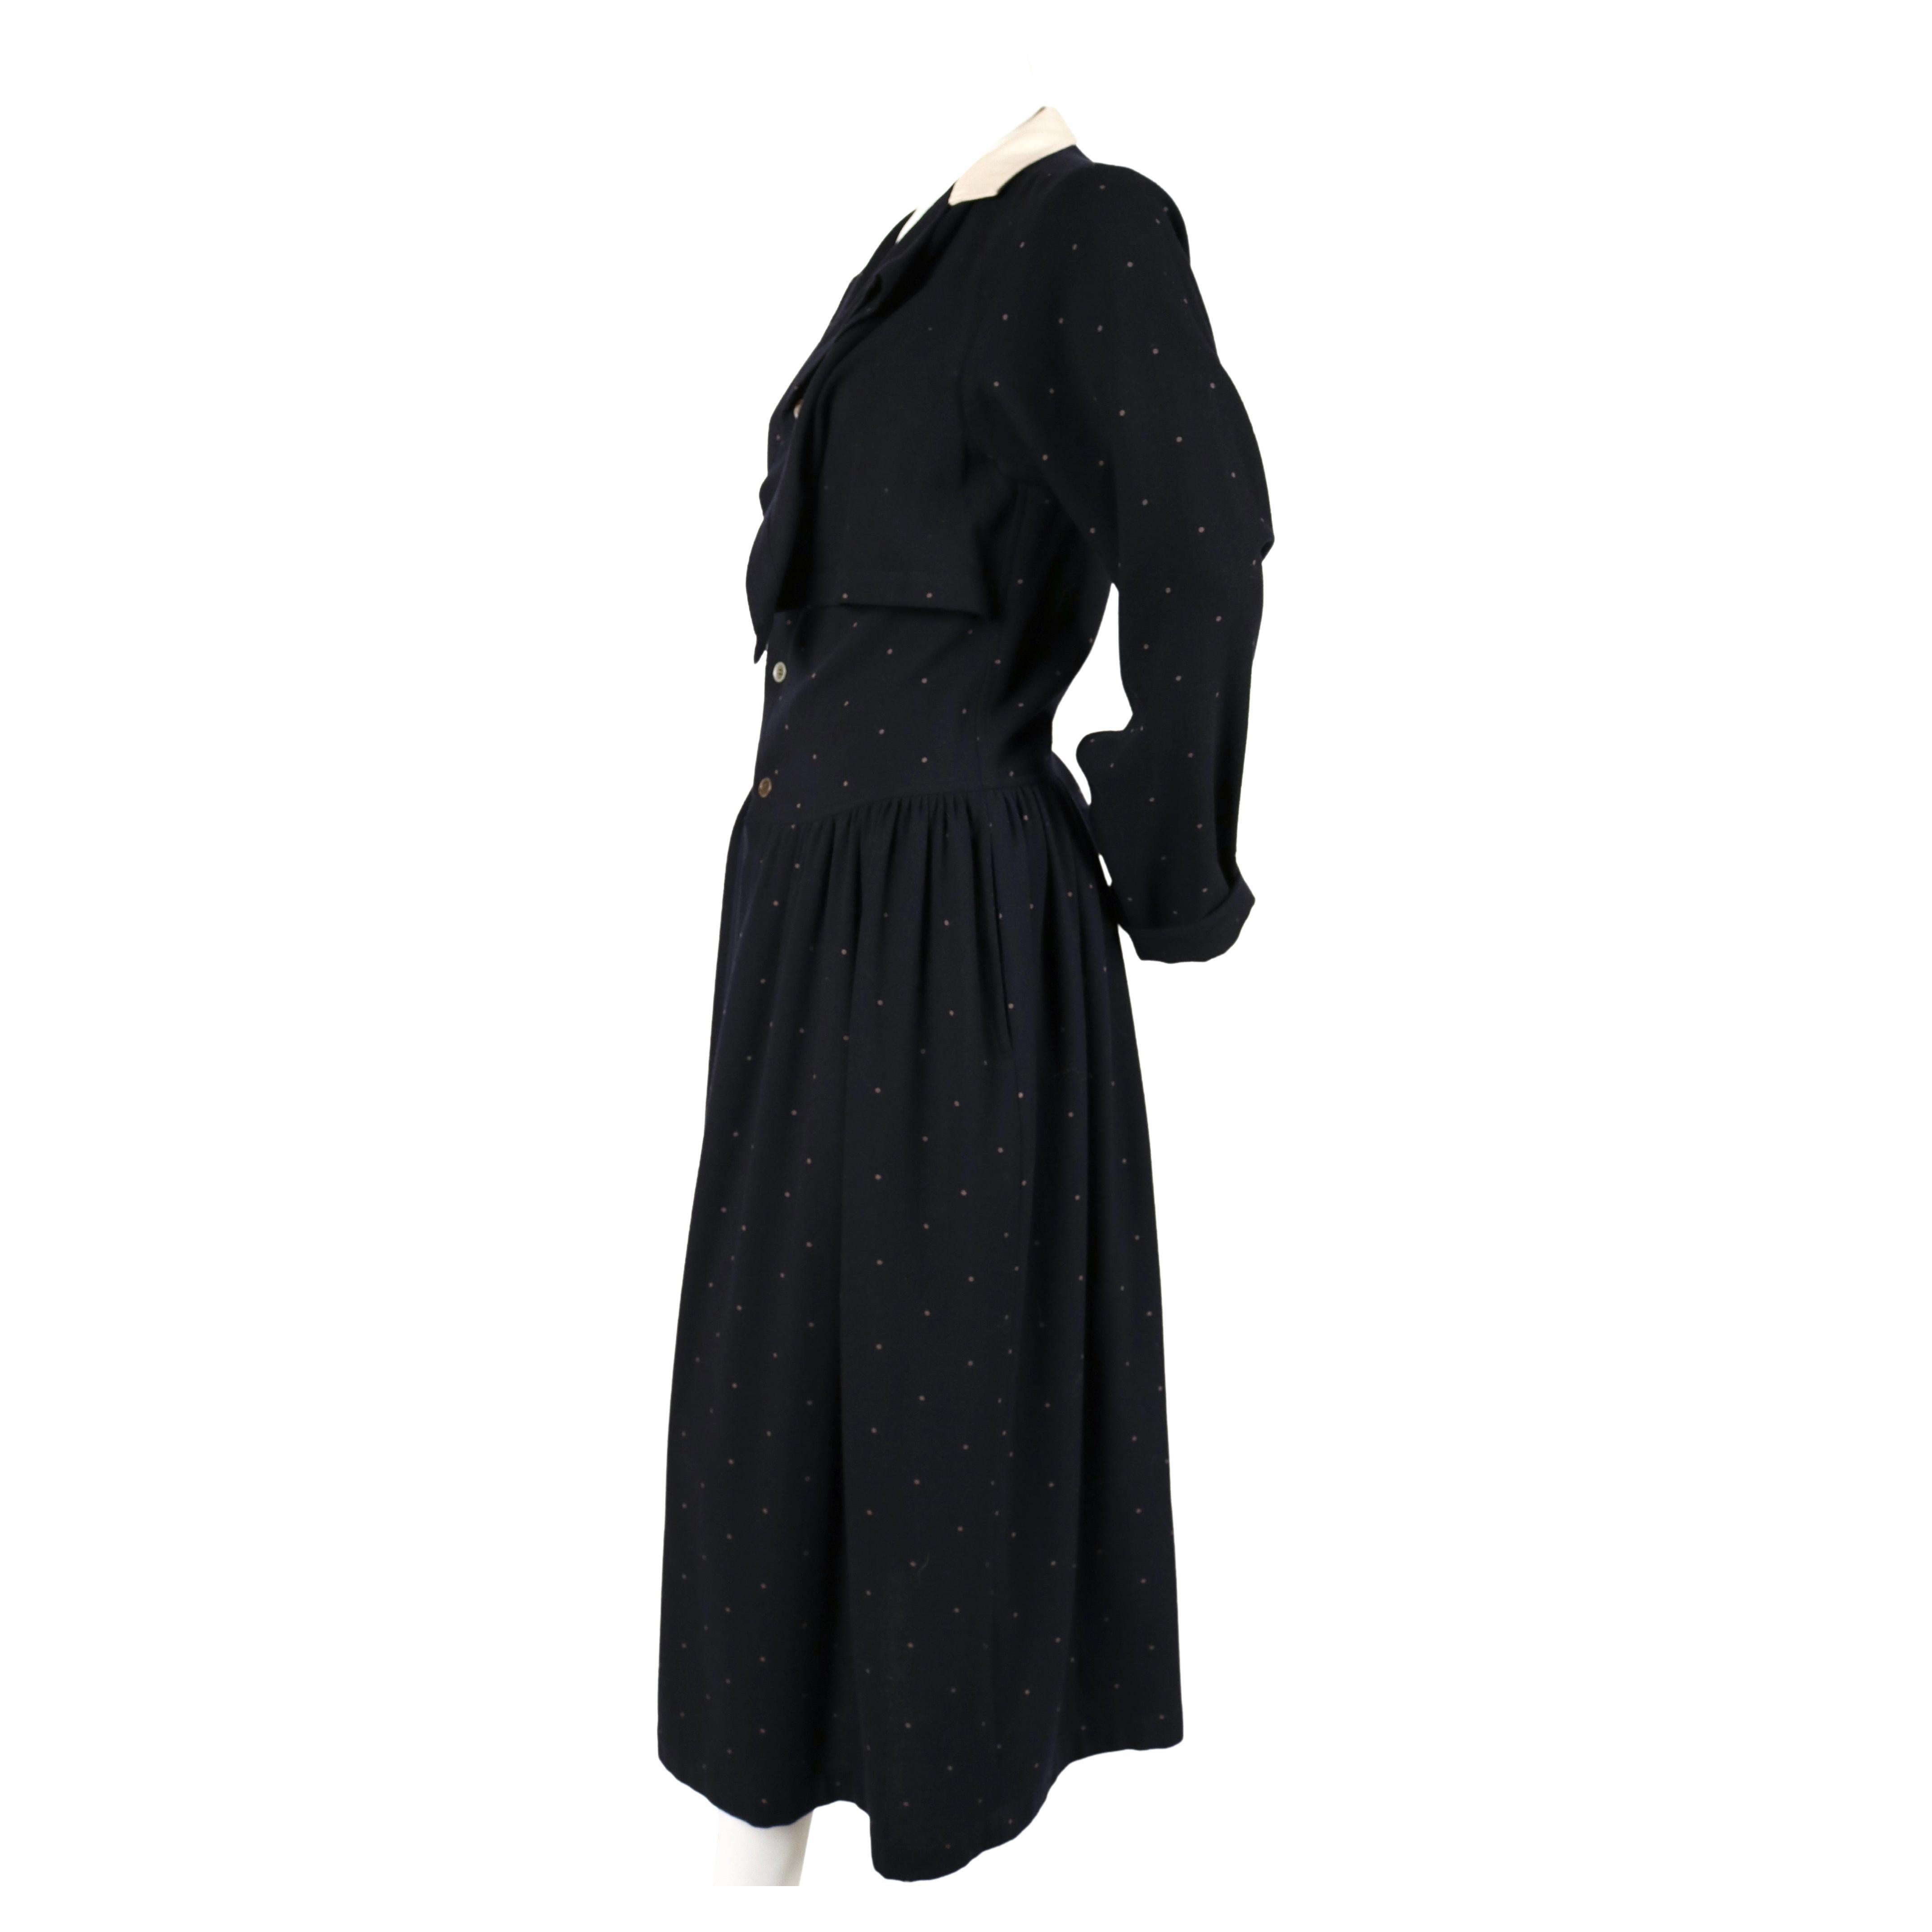 Women's or Men's 1985 COMME DES GARCONS navy wool draped dress with polka dots